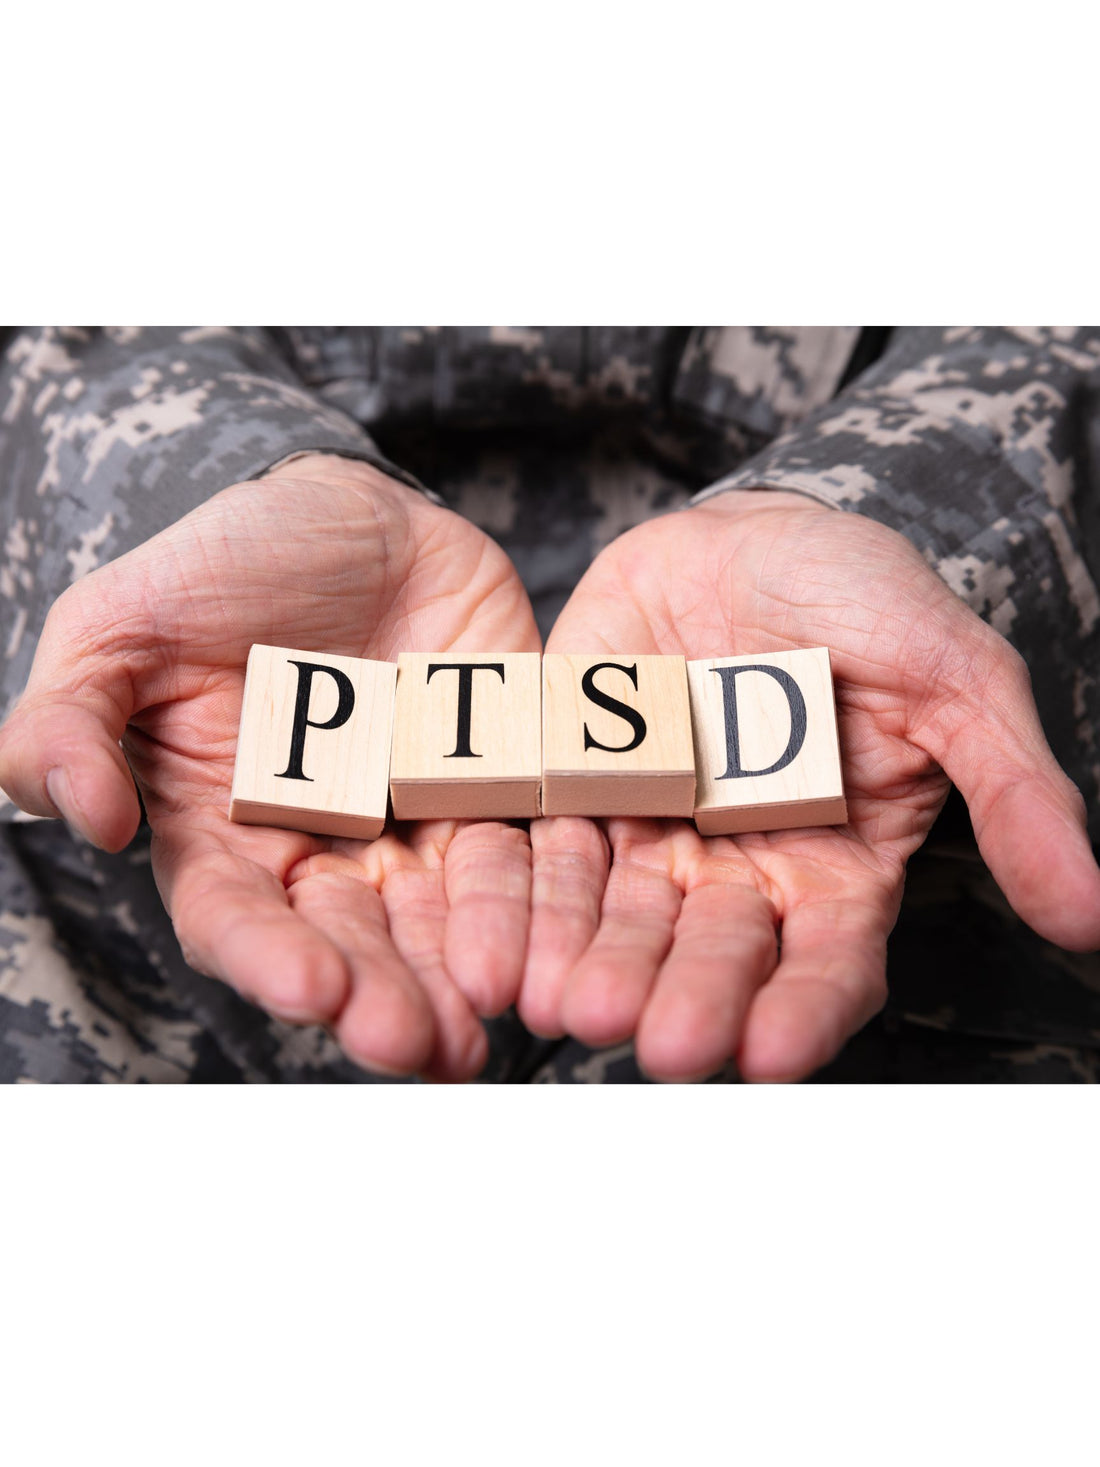 Exploring the Remarkable Benefits of Full-Spectrum CBD for Veterans with PTSD and Traumatic Brain Injury